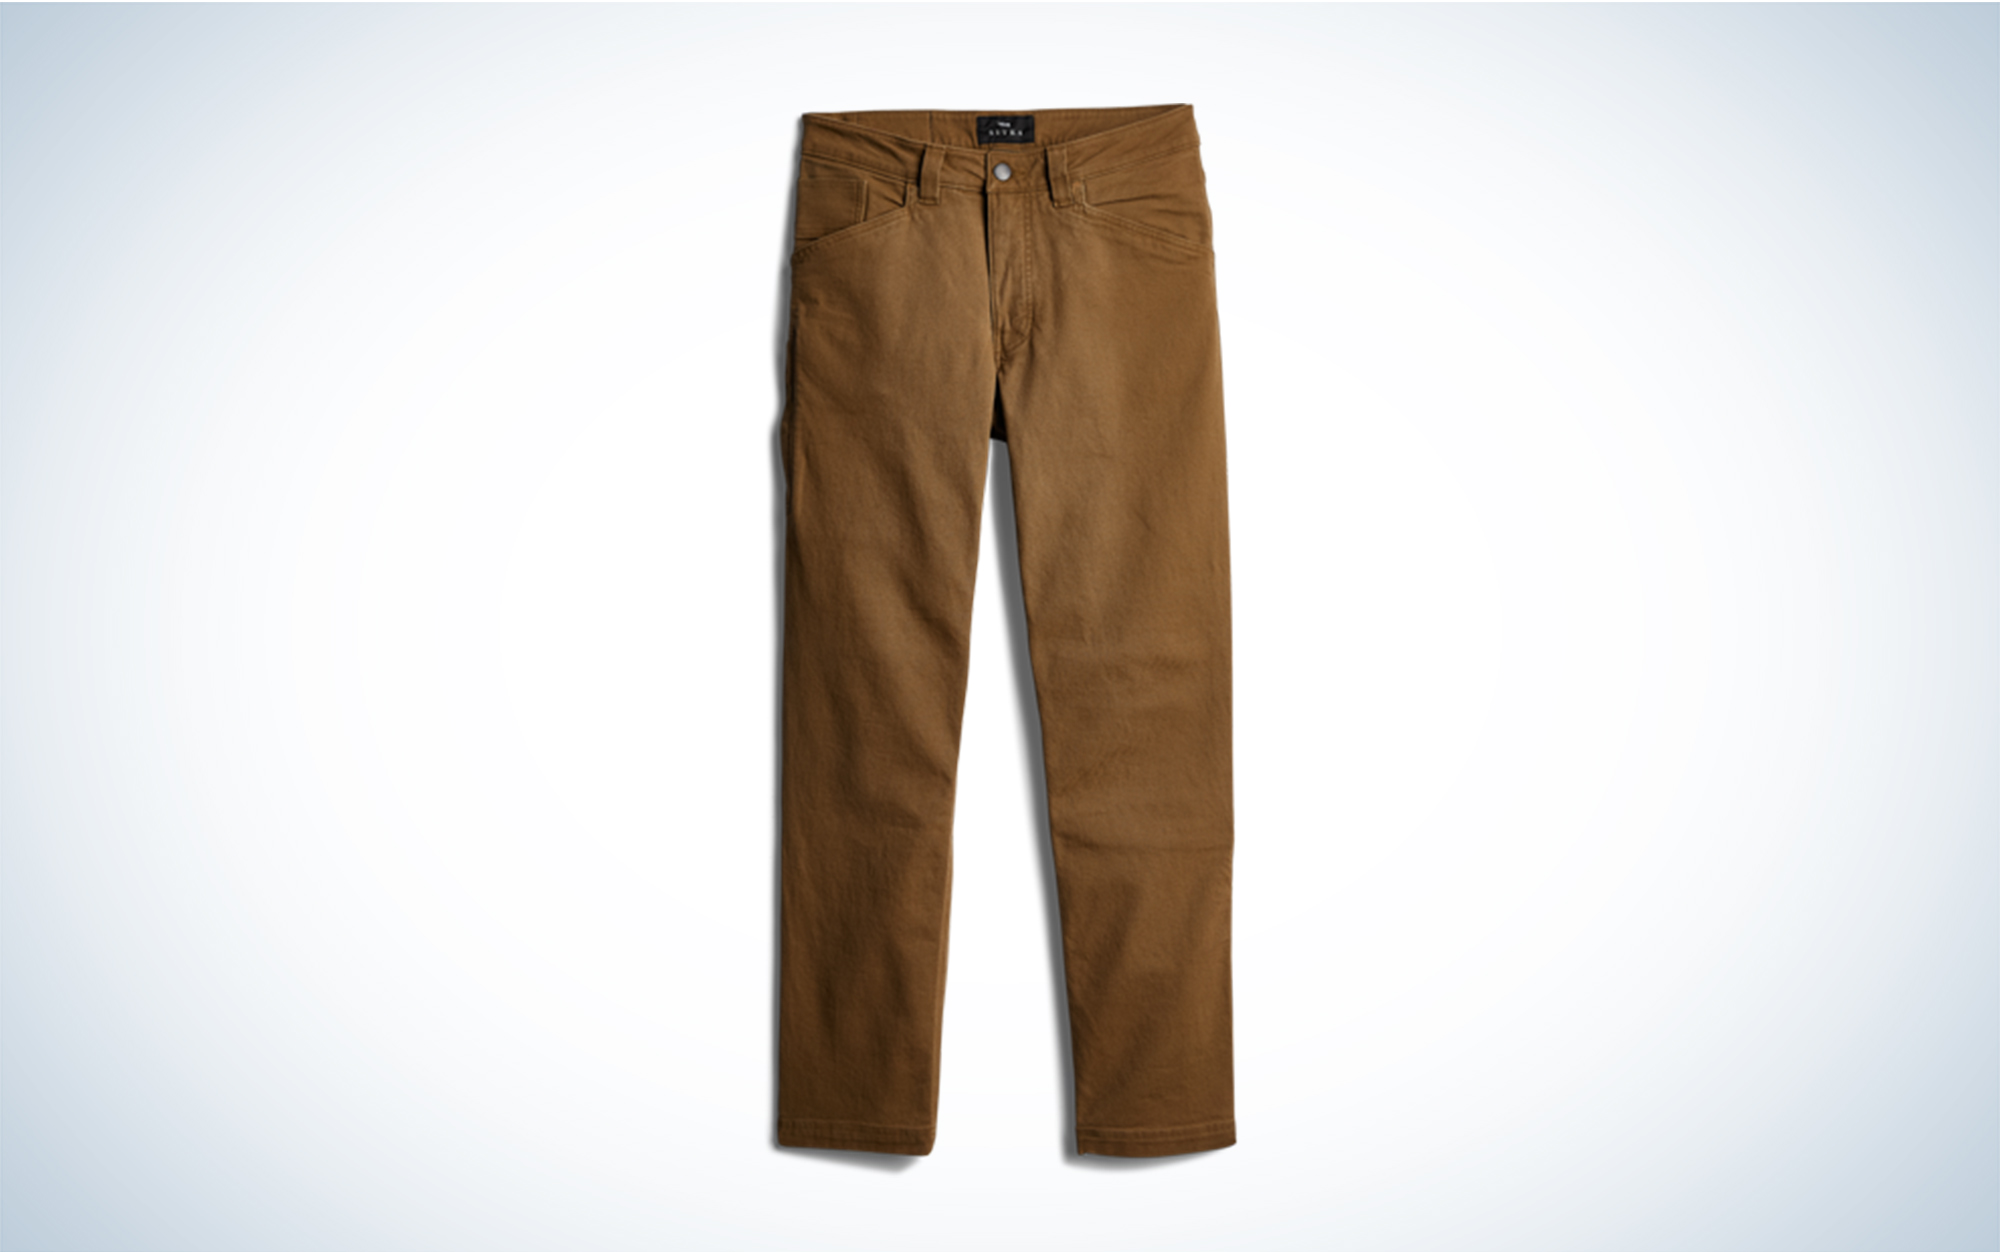 The SITKA Harvester Pant is available in coyote brown.